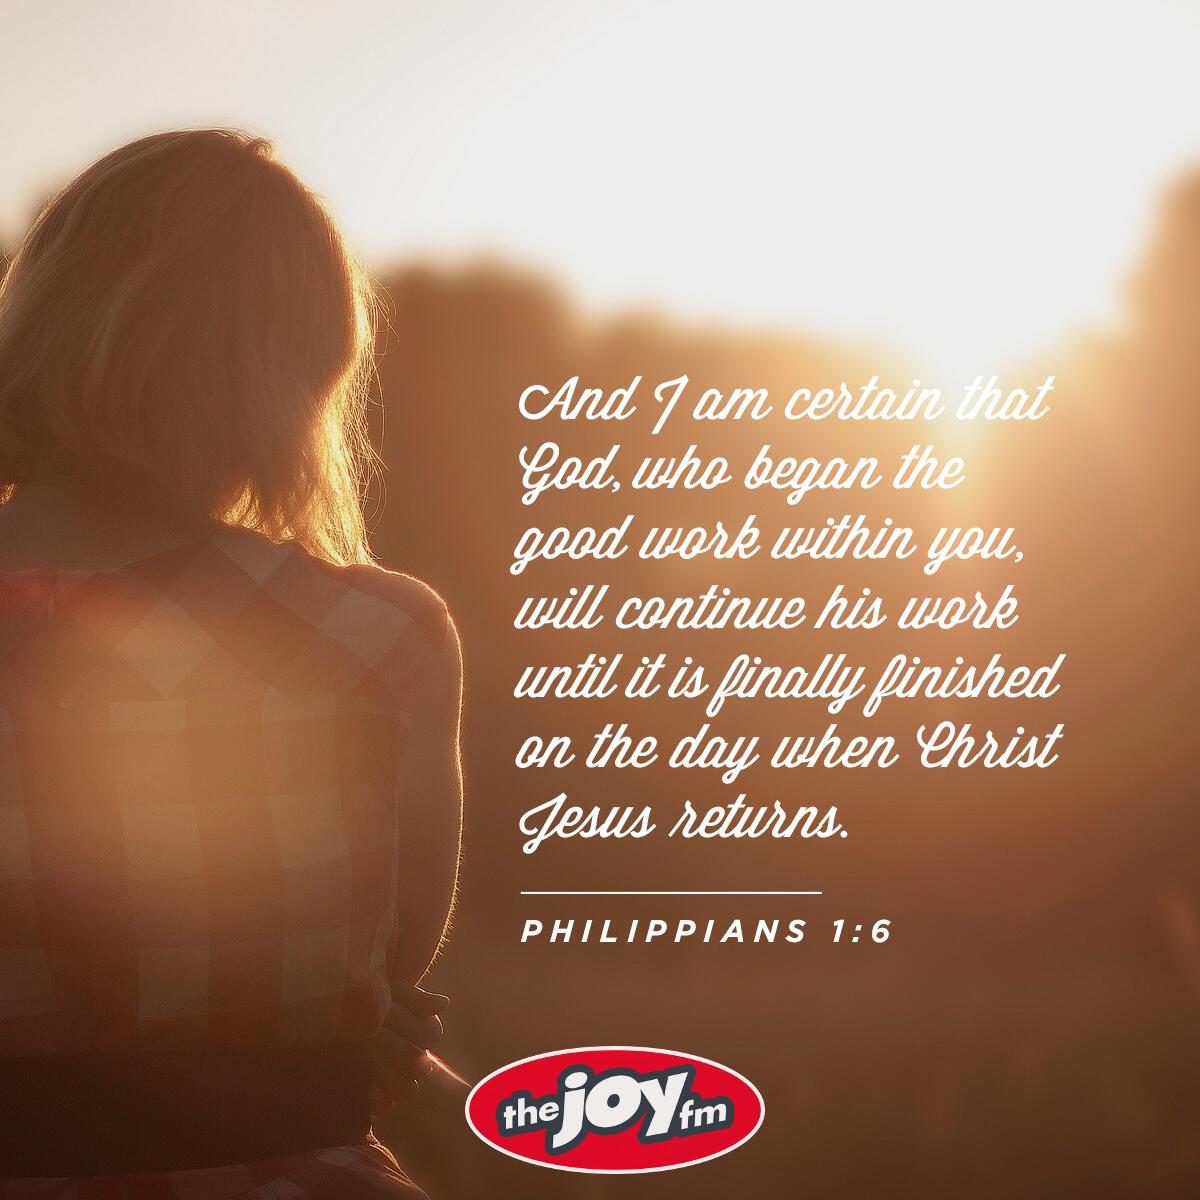 Philippians 1:6 - Verse of the Day